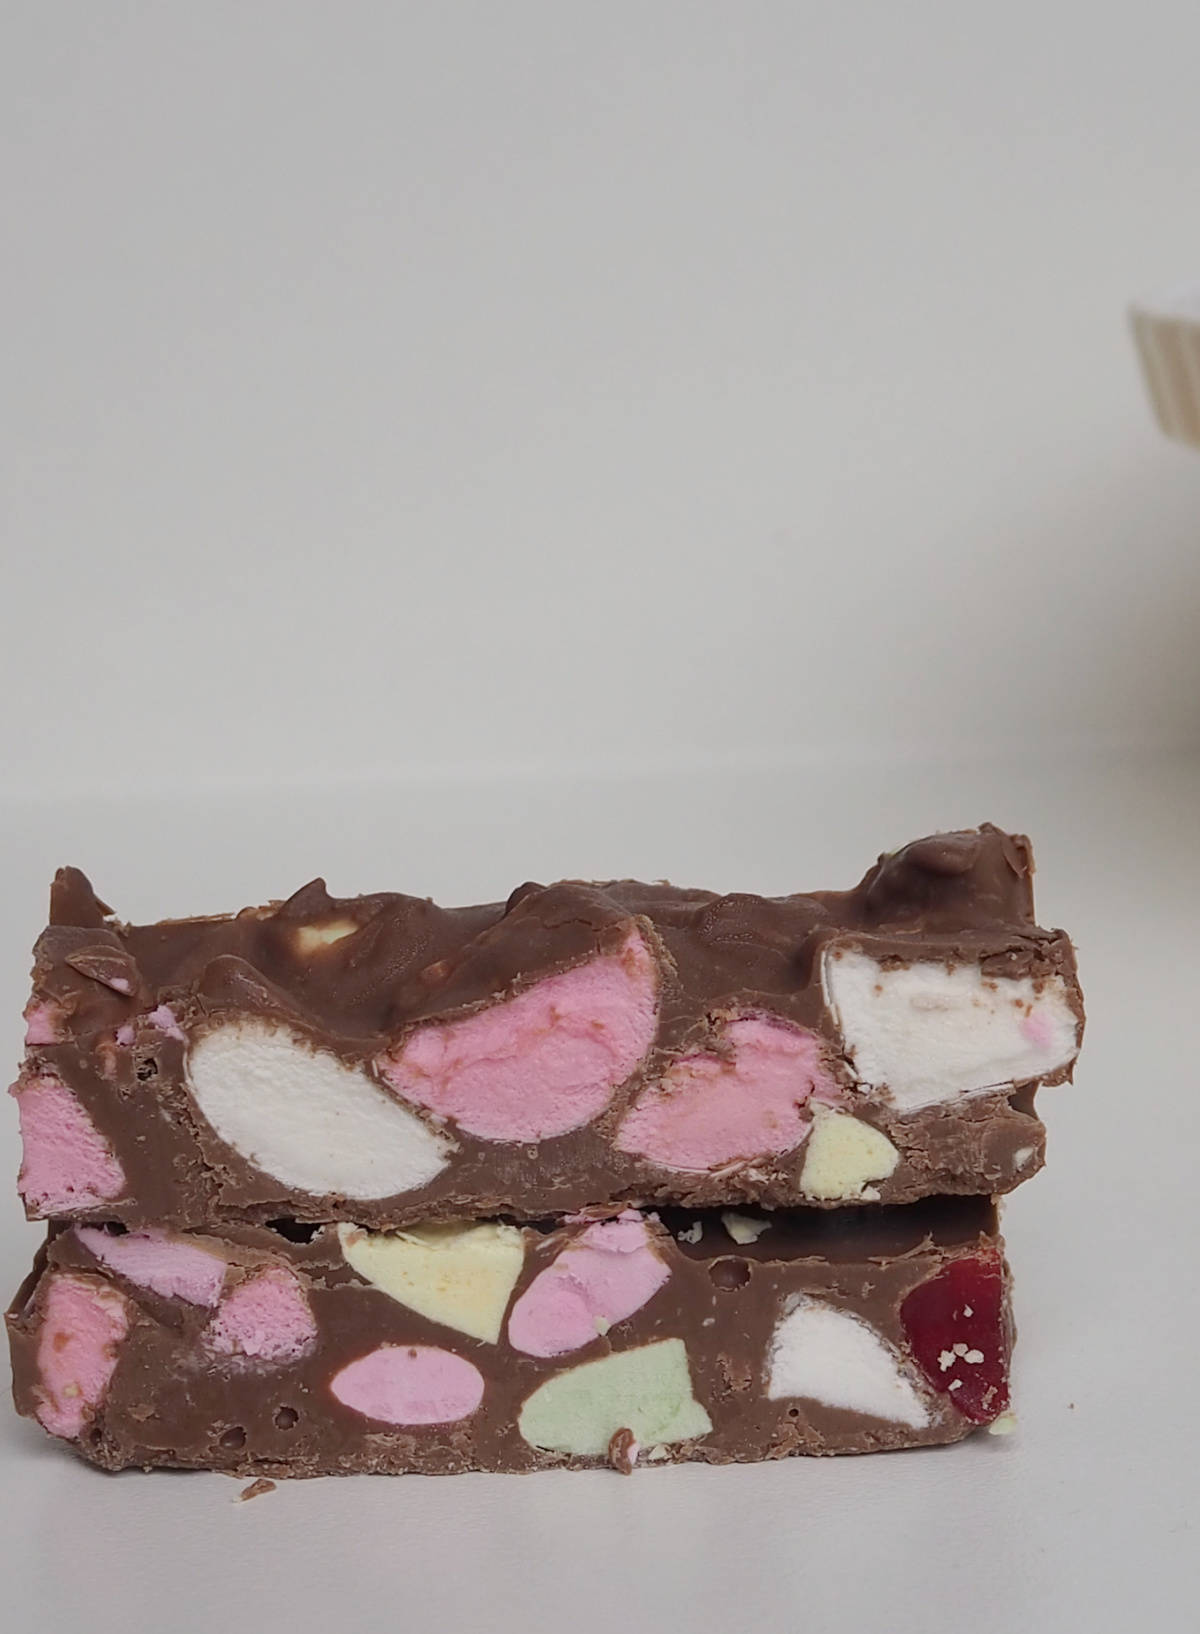 Two pieces of Clinkers Rocky Road stacked on top of each other.